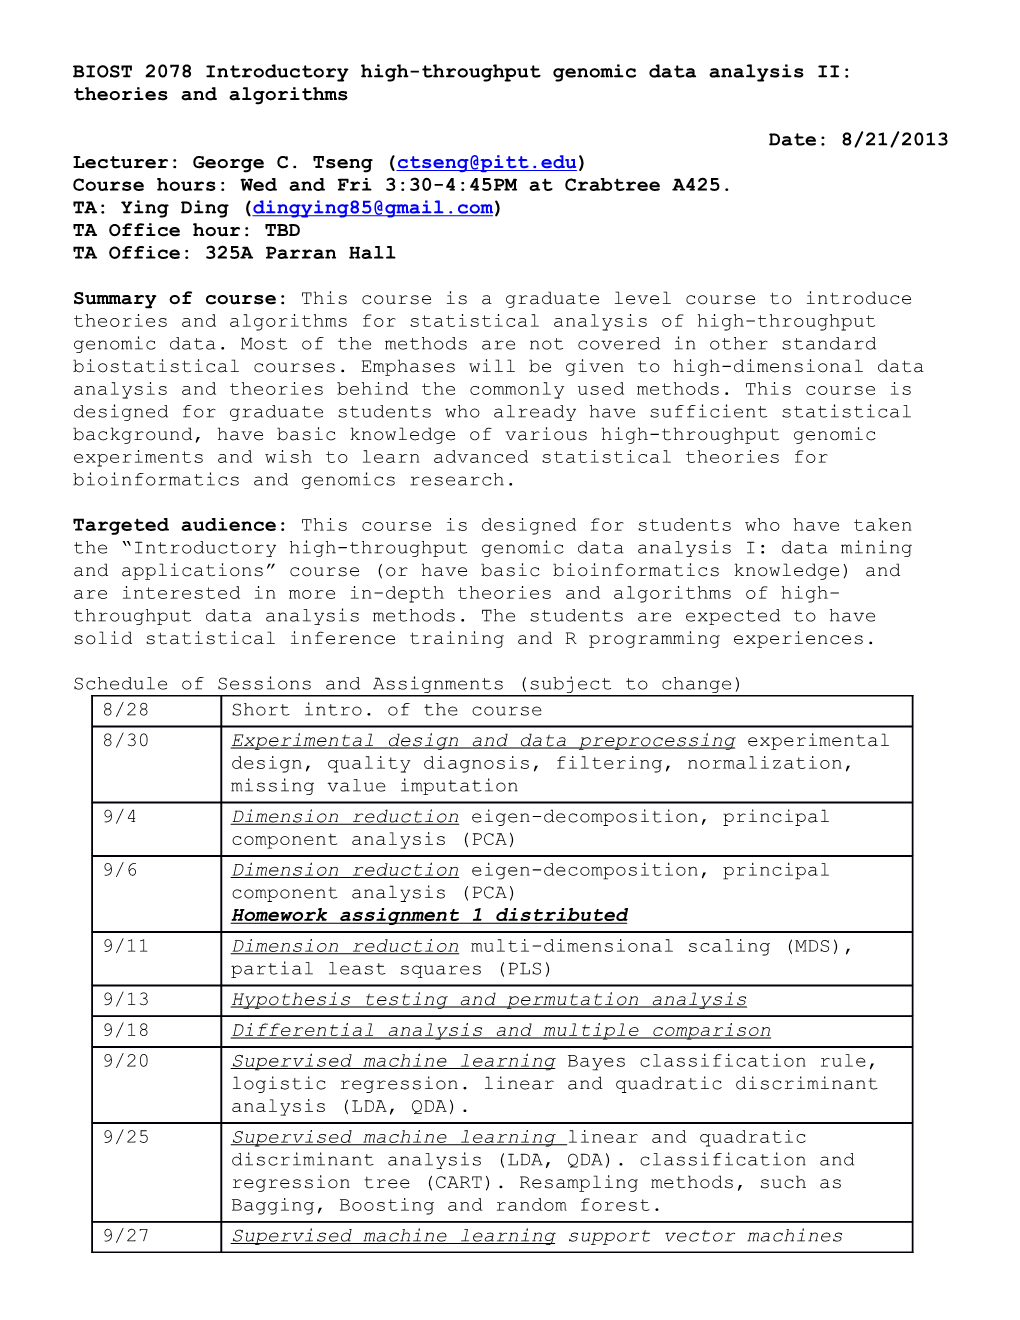 Proposed GSPH Syllabus Template